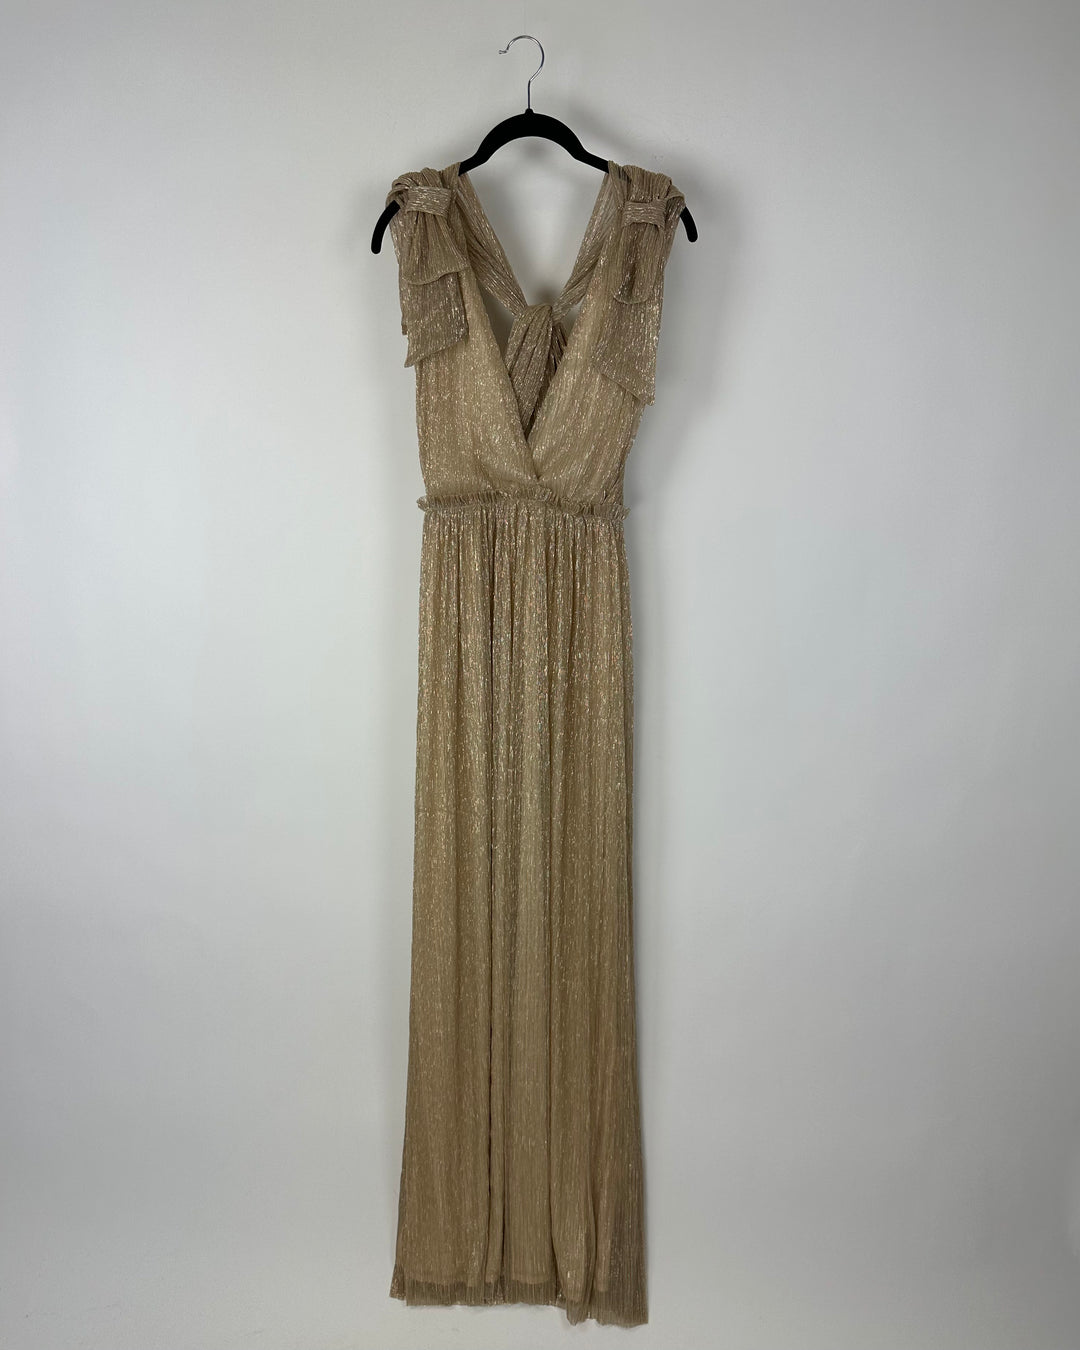 Gold Metallic Tie Shoulder Maxi Dress - Size 0/2 and 14/16